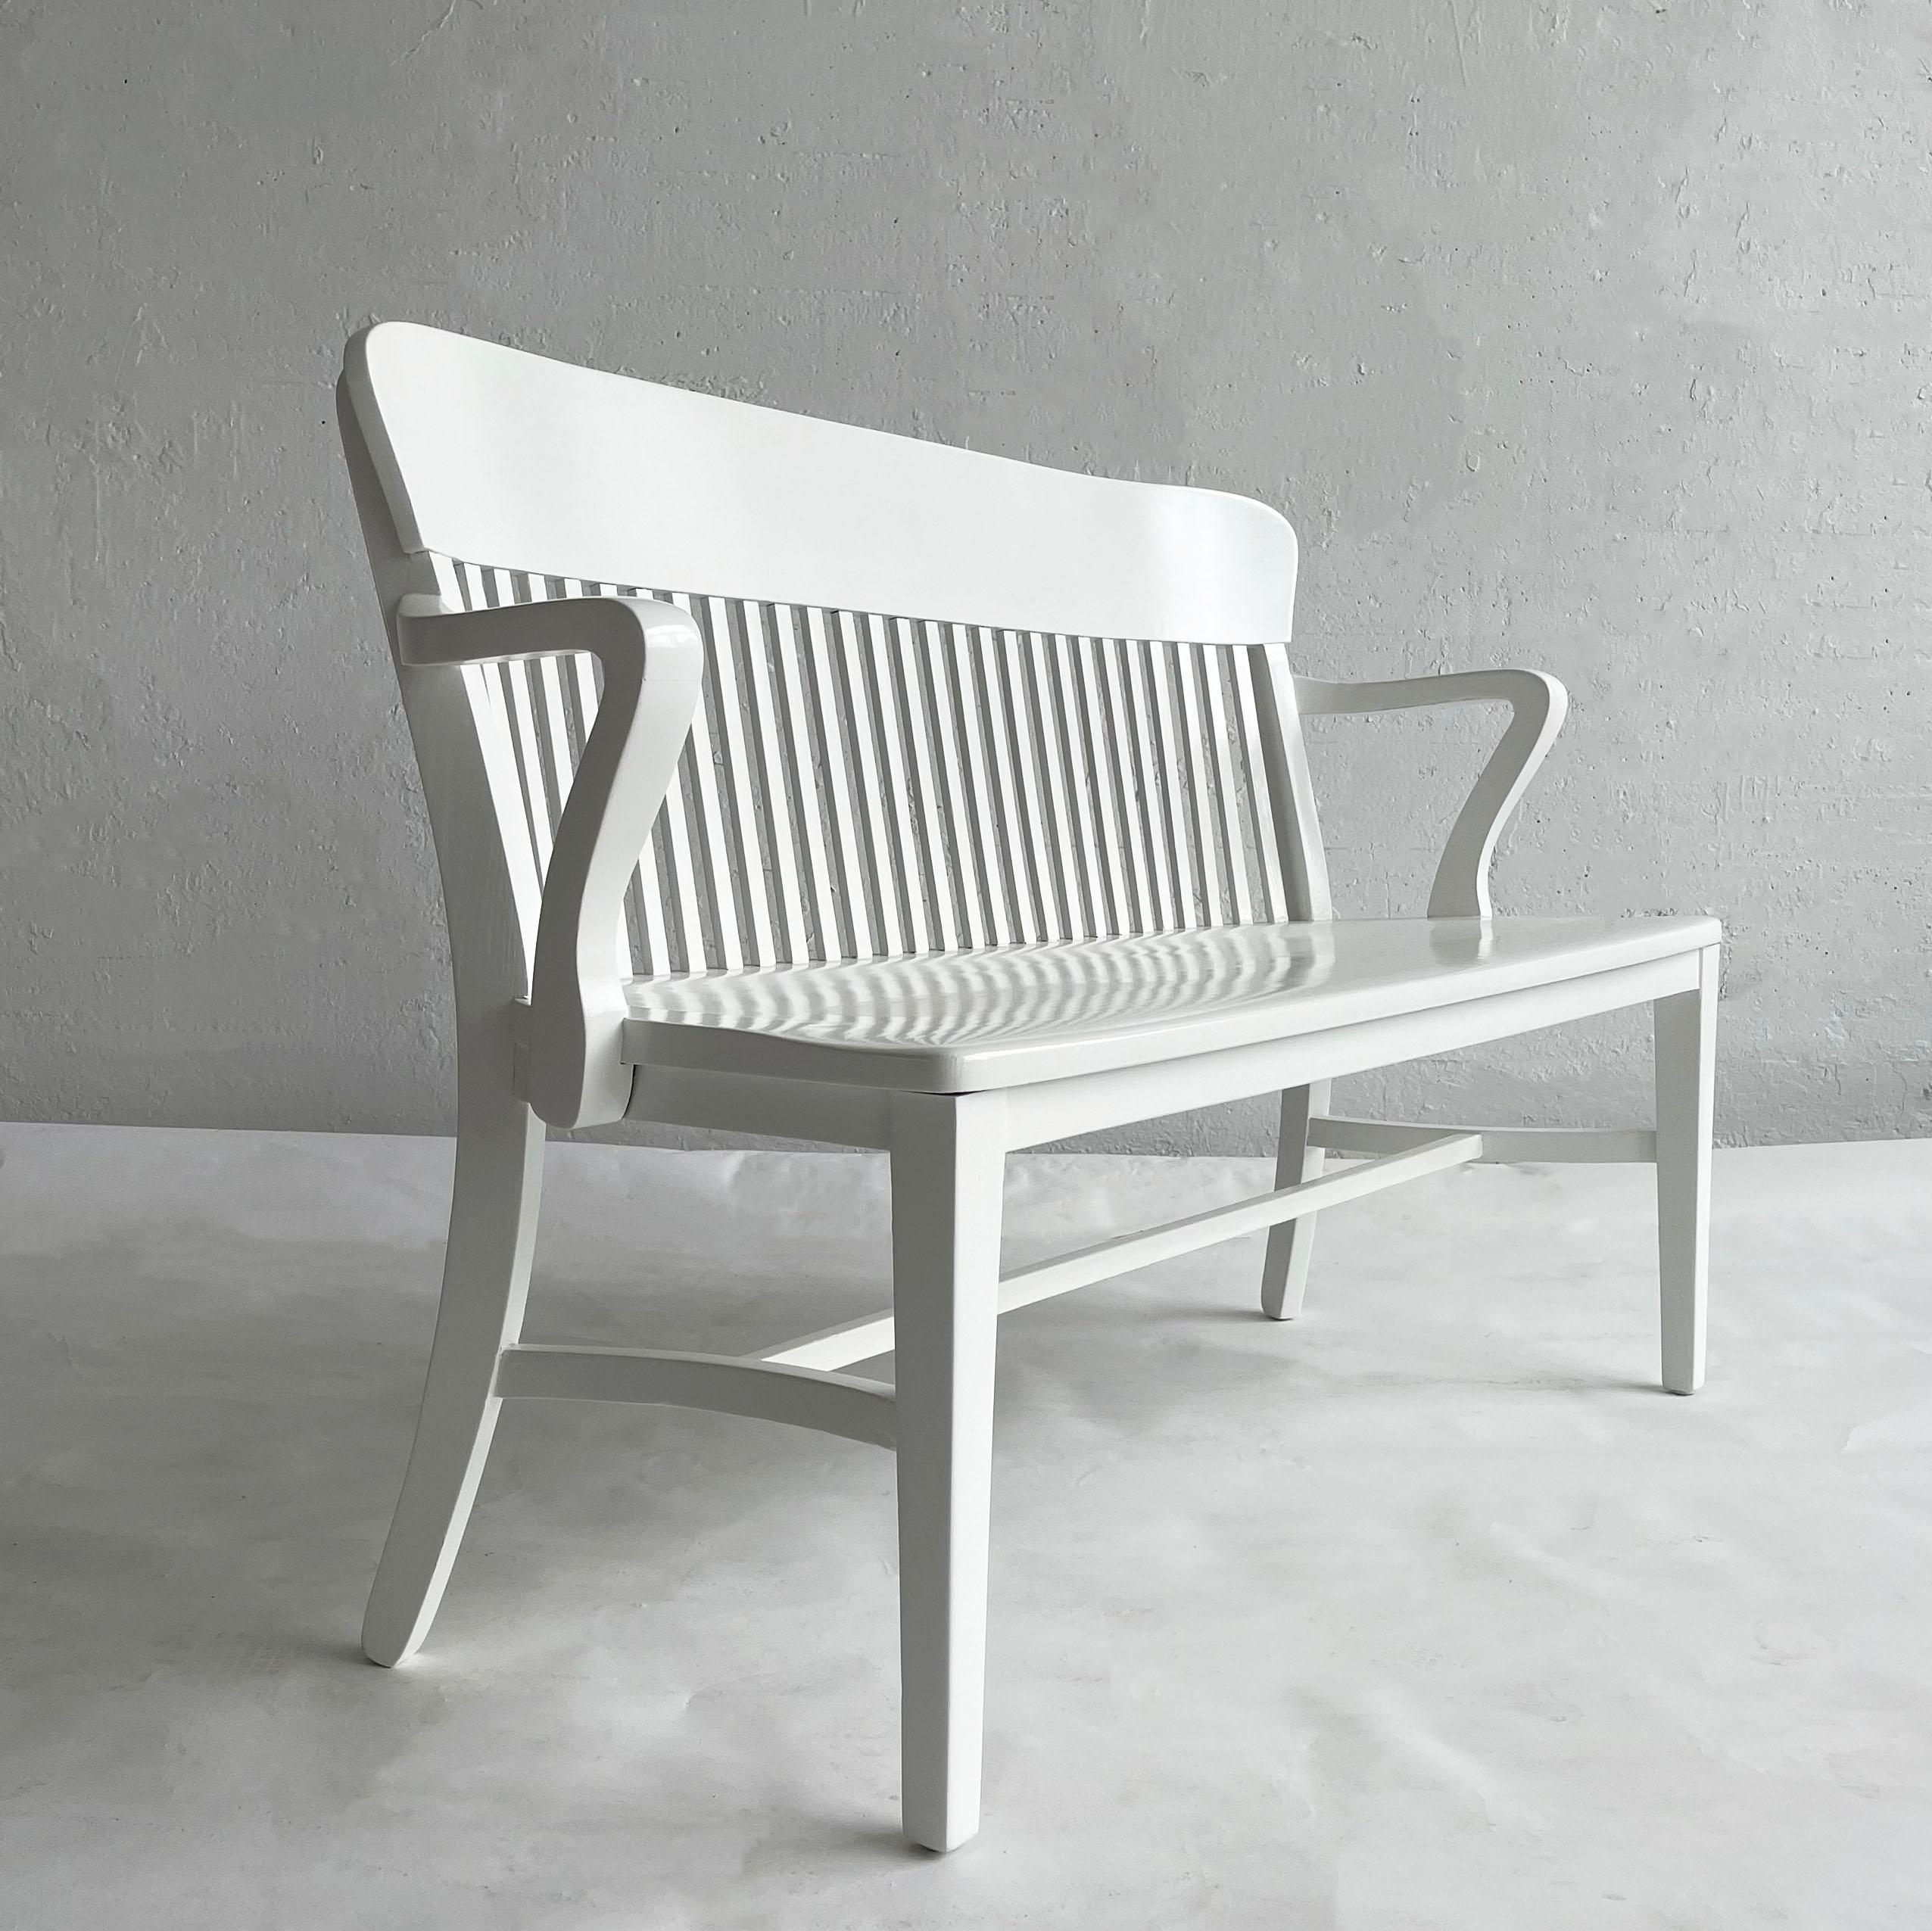 white spindle bench